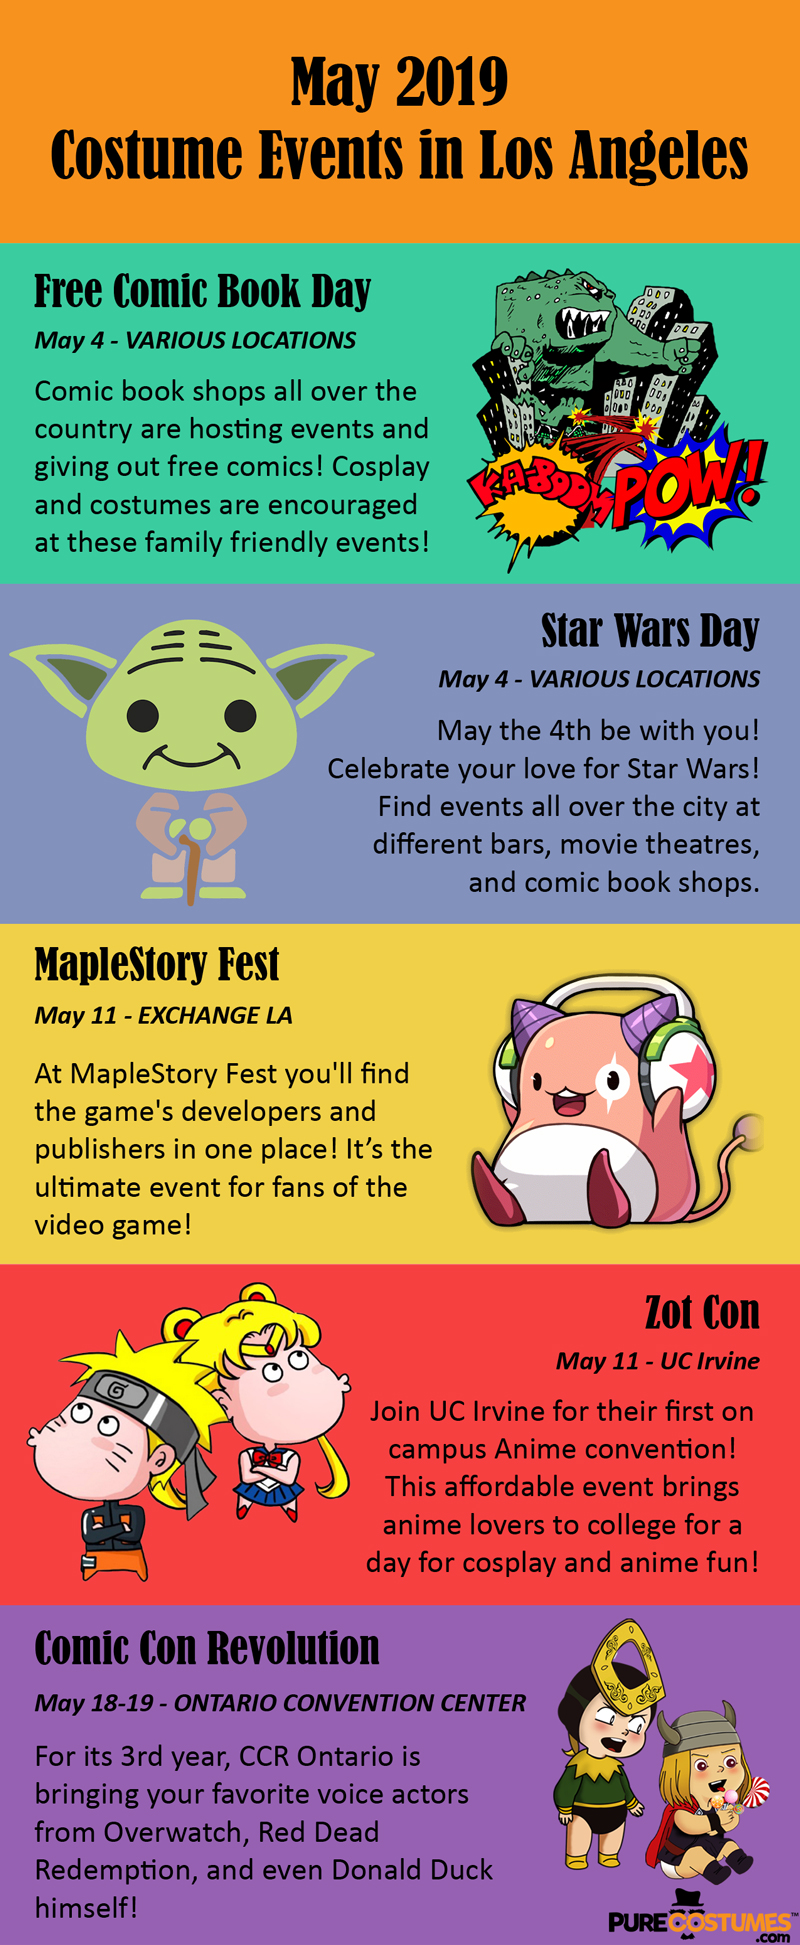 infographic Los Angeles Area Costume Events May 2019